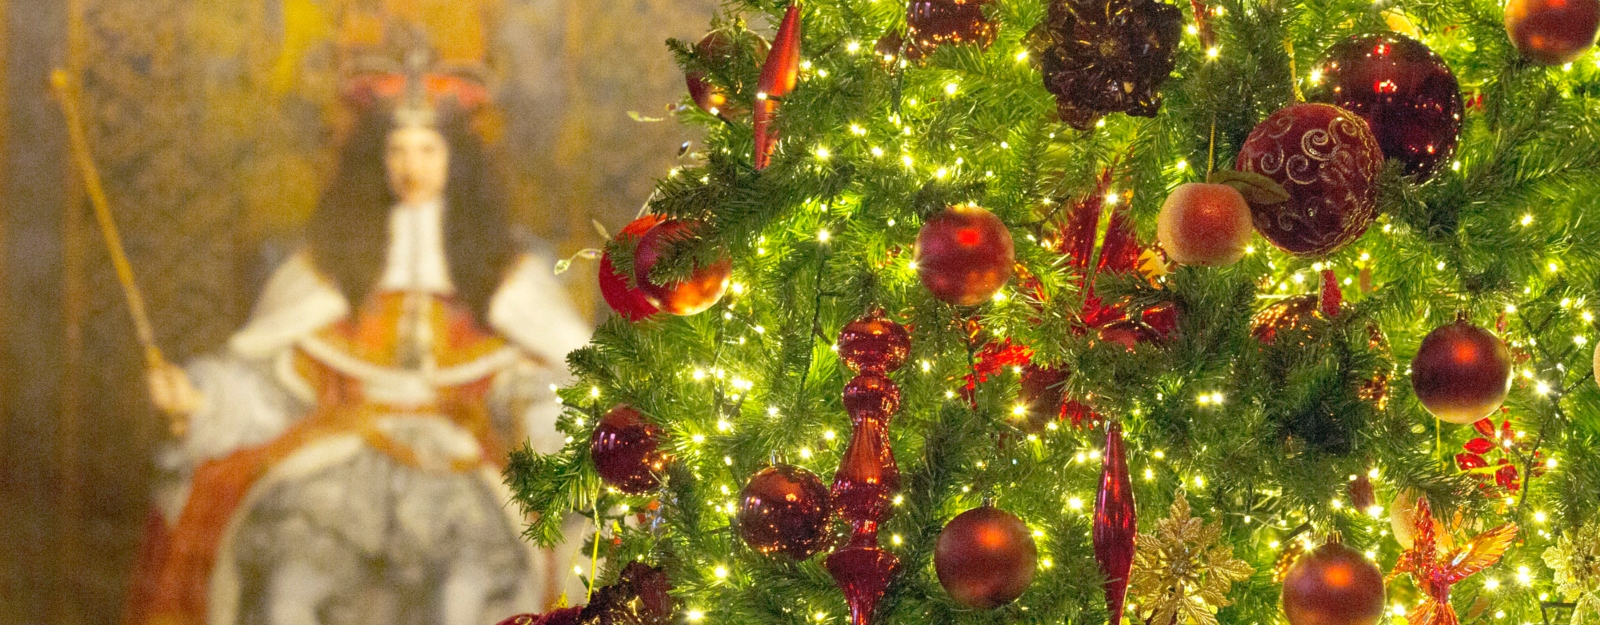 Close up photograph of a Christmas tree in front of a painting of Charles II in the Throne Room, Palace of Holyroodhouse